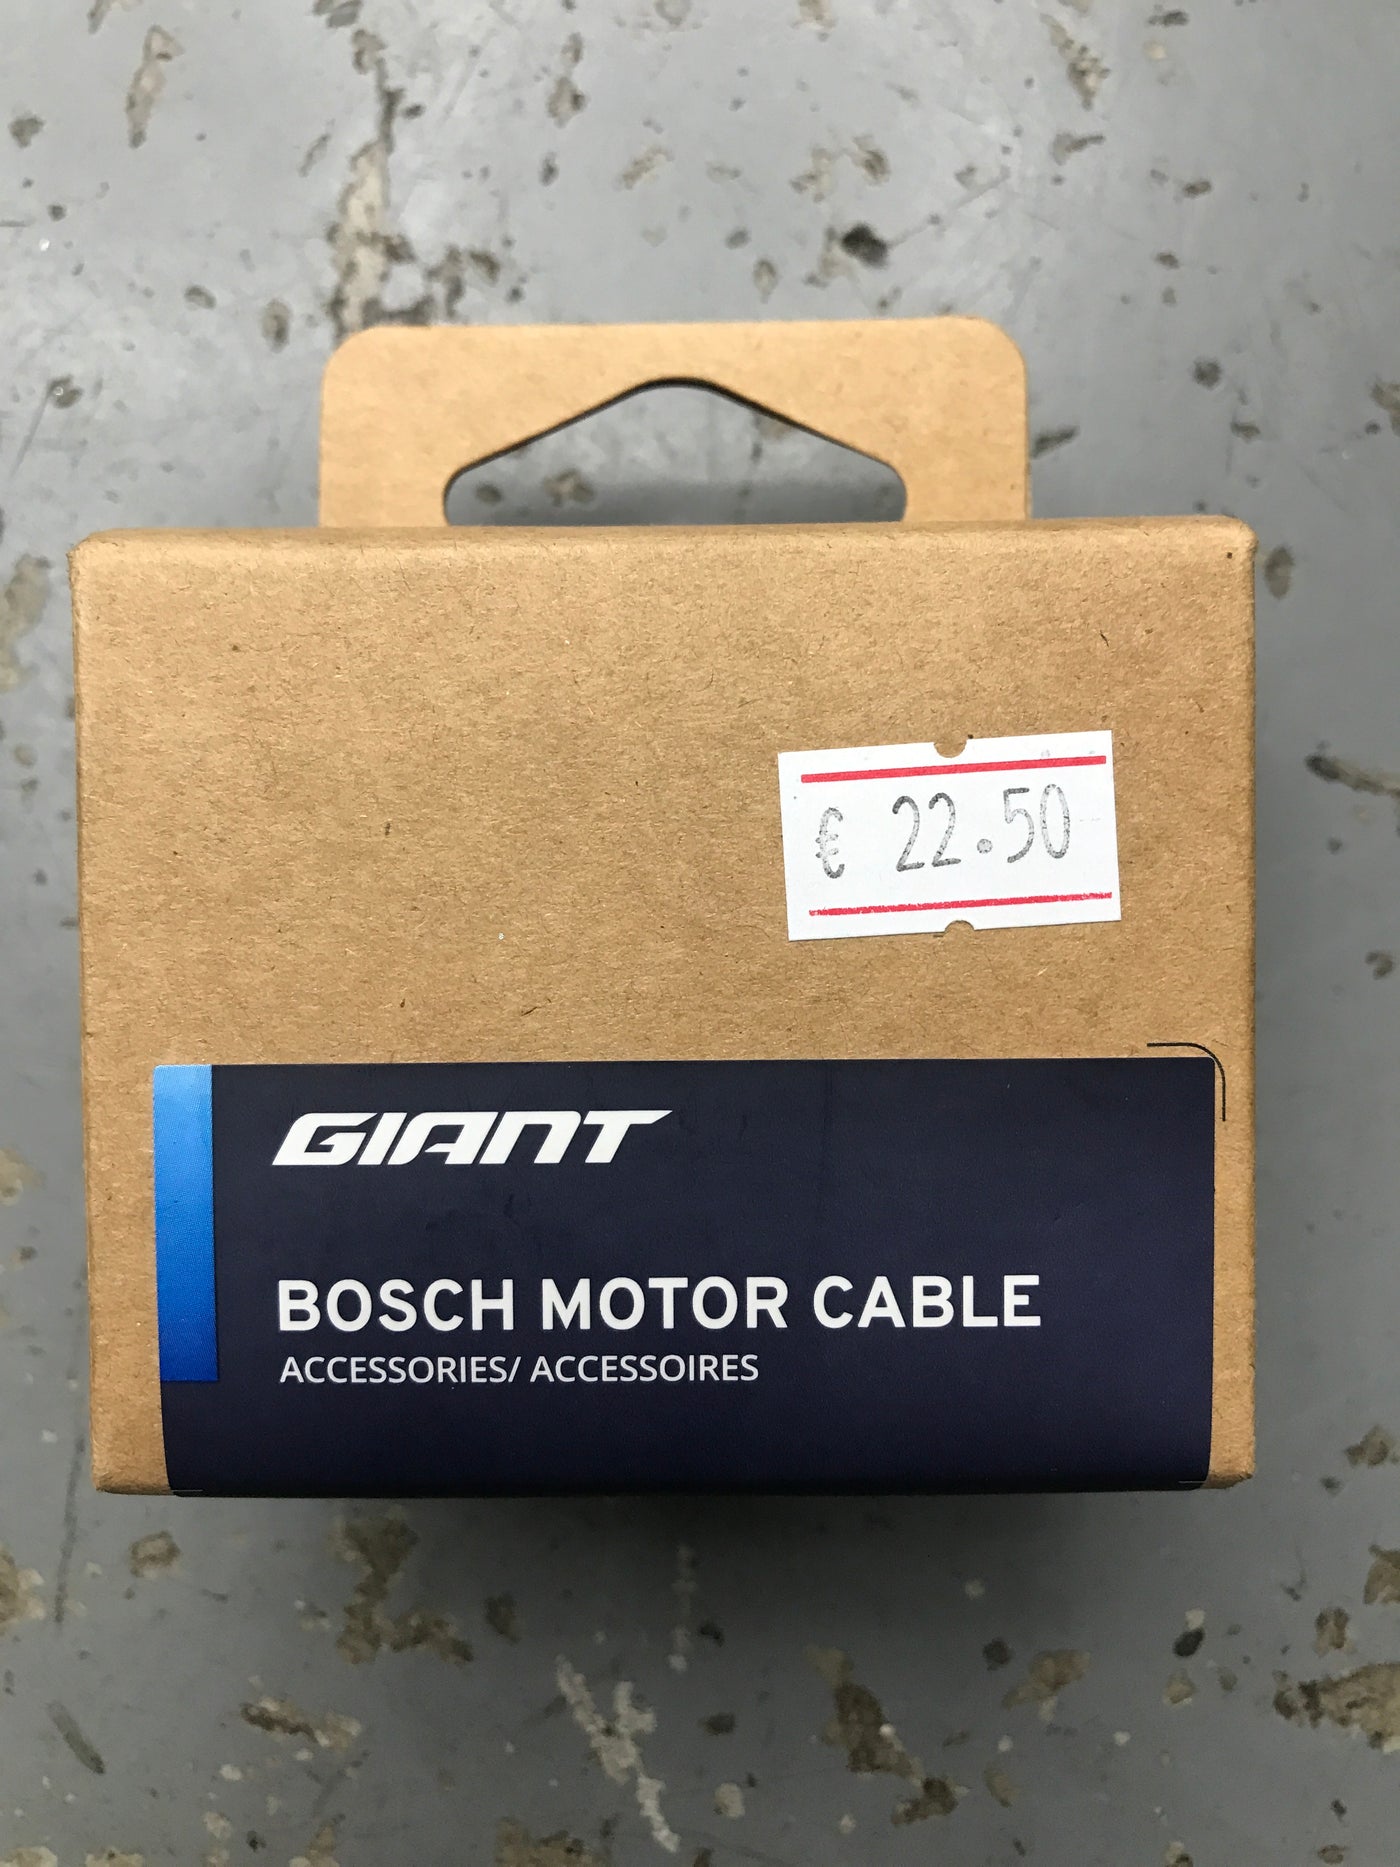 Giant Bosch Motor Cable